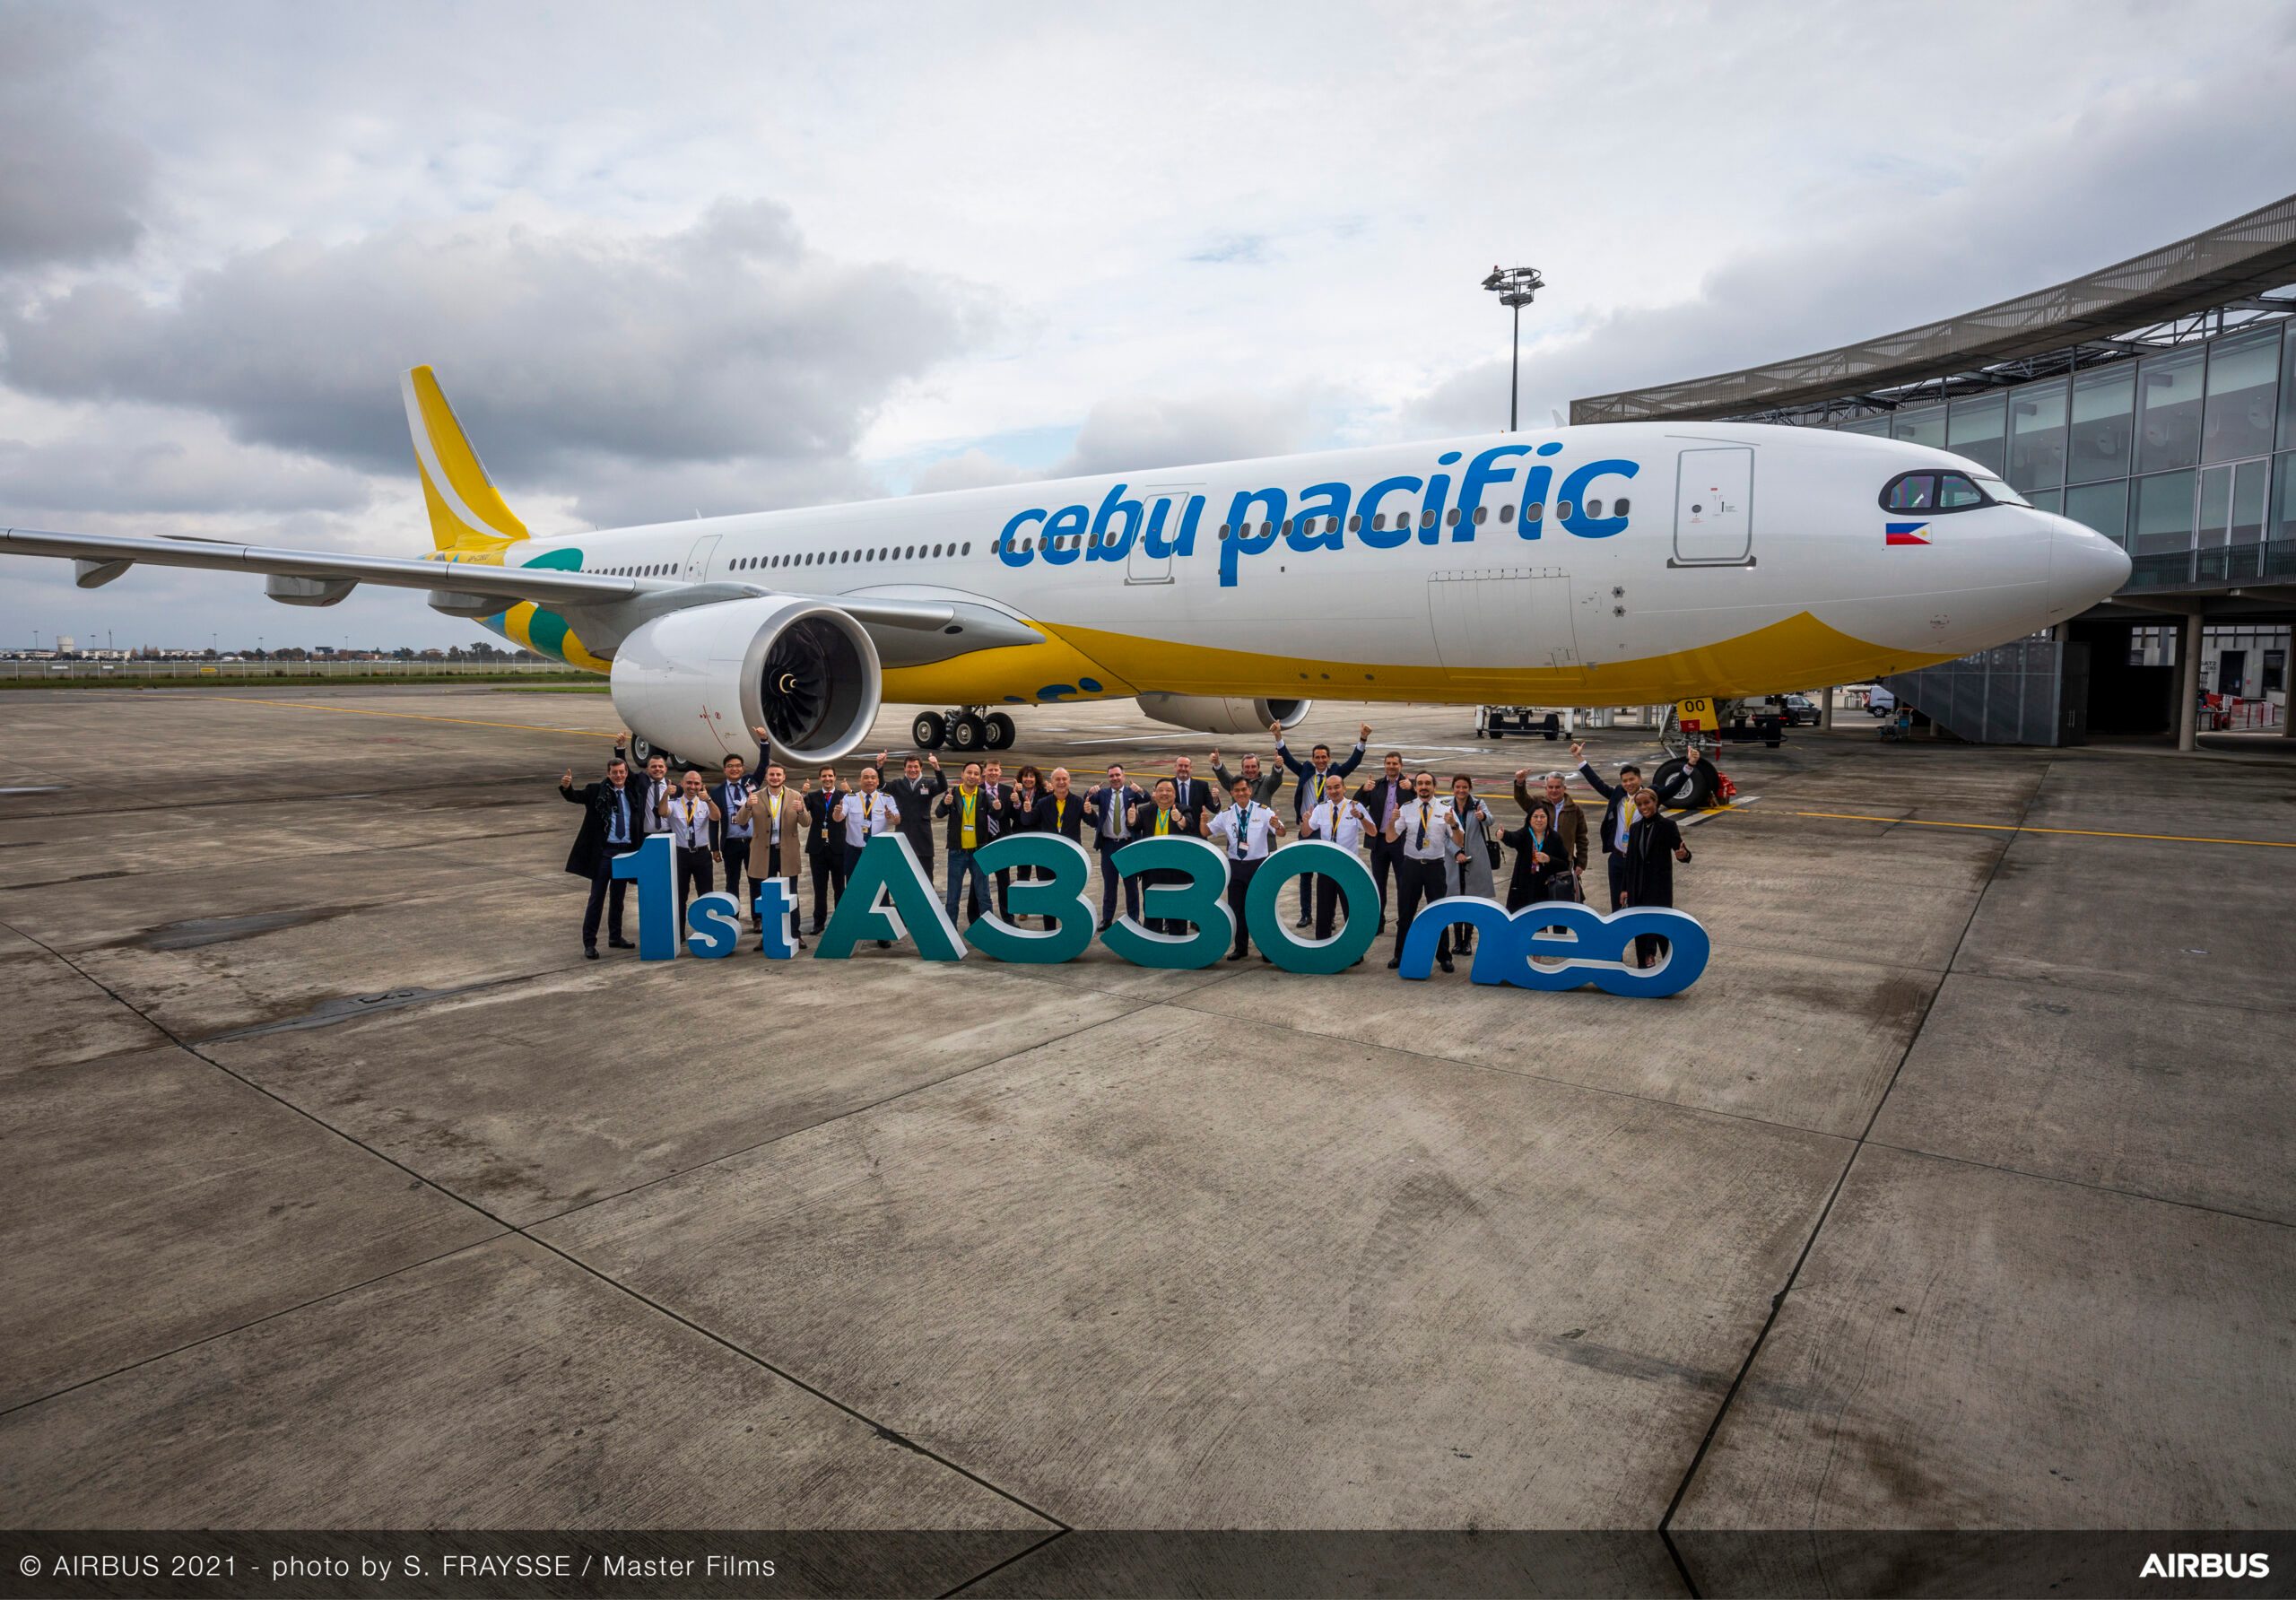 Cebu Pacific readying for revenge travel with A330neo delivery